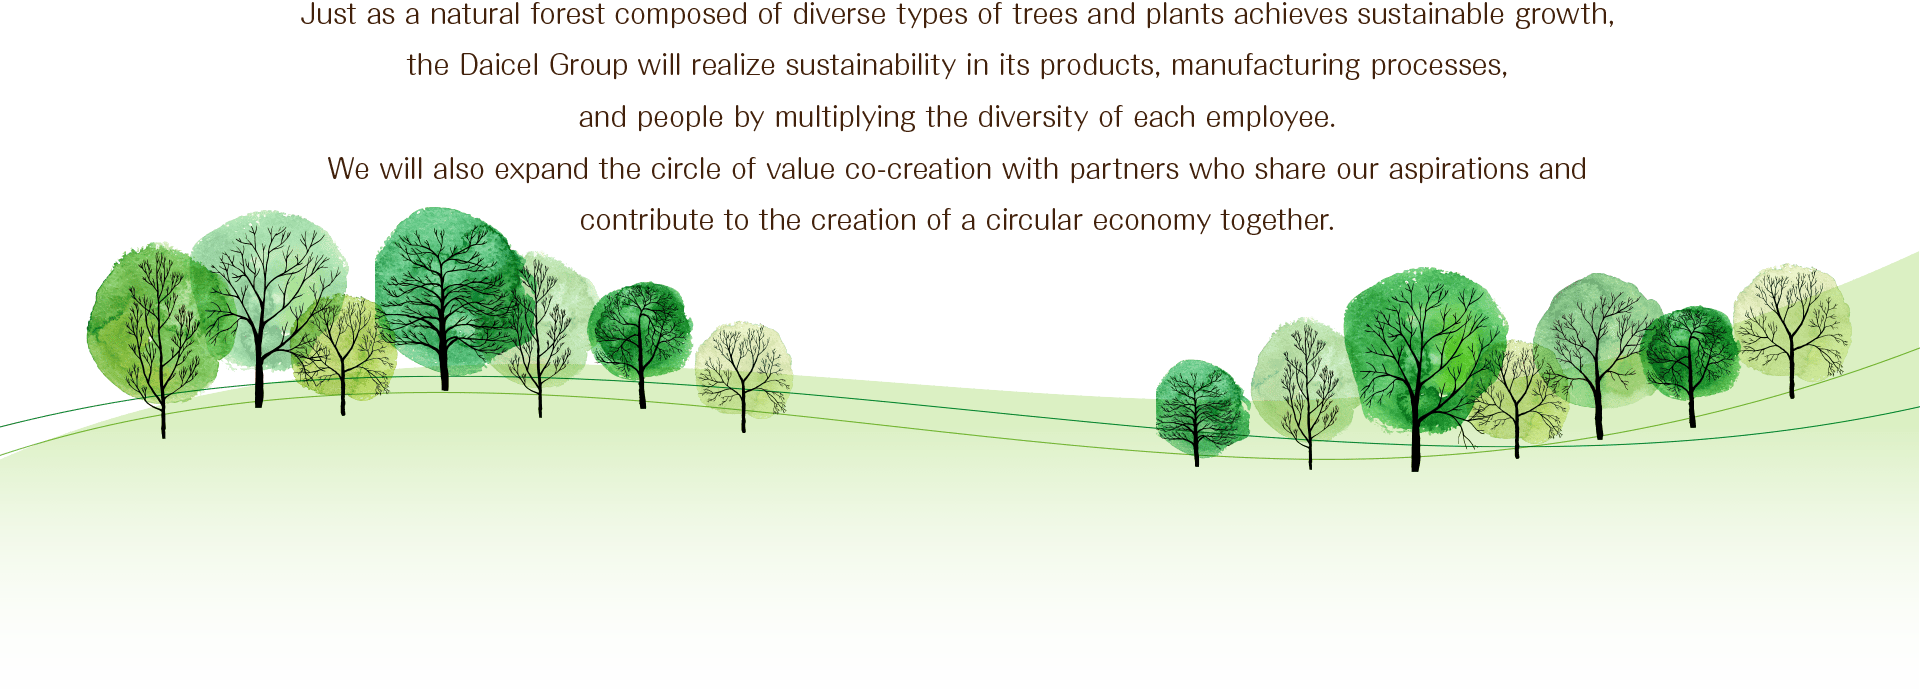 Just as a natural forest composed of diverse types of trees and plants achieves sustainable growth, the Daicel Group will realize sustainability in its products, manufacturing processes, and people by multiplying the diversity of each employee. We will also expand the circle of value co-creation with partners who share our aspirations and contribute to the creation of a circular economy together.